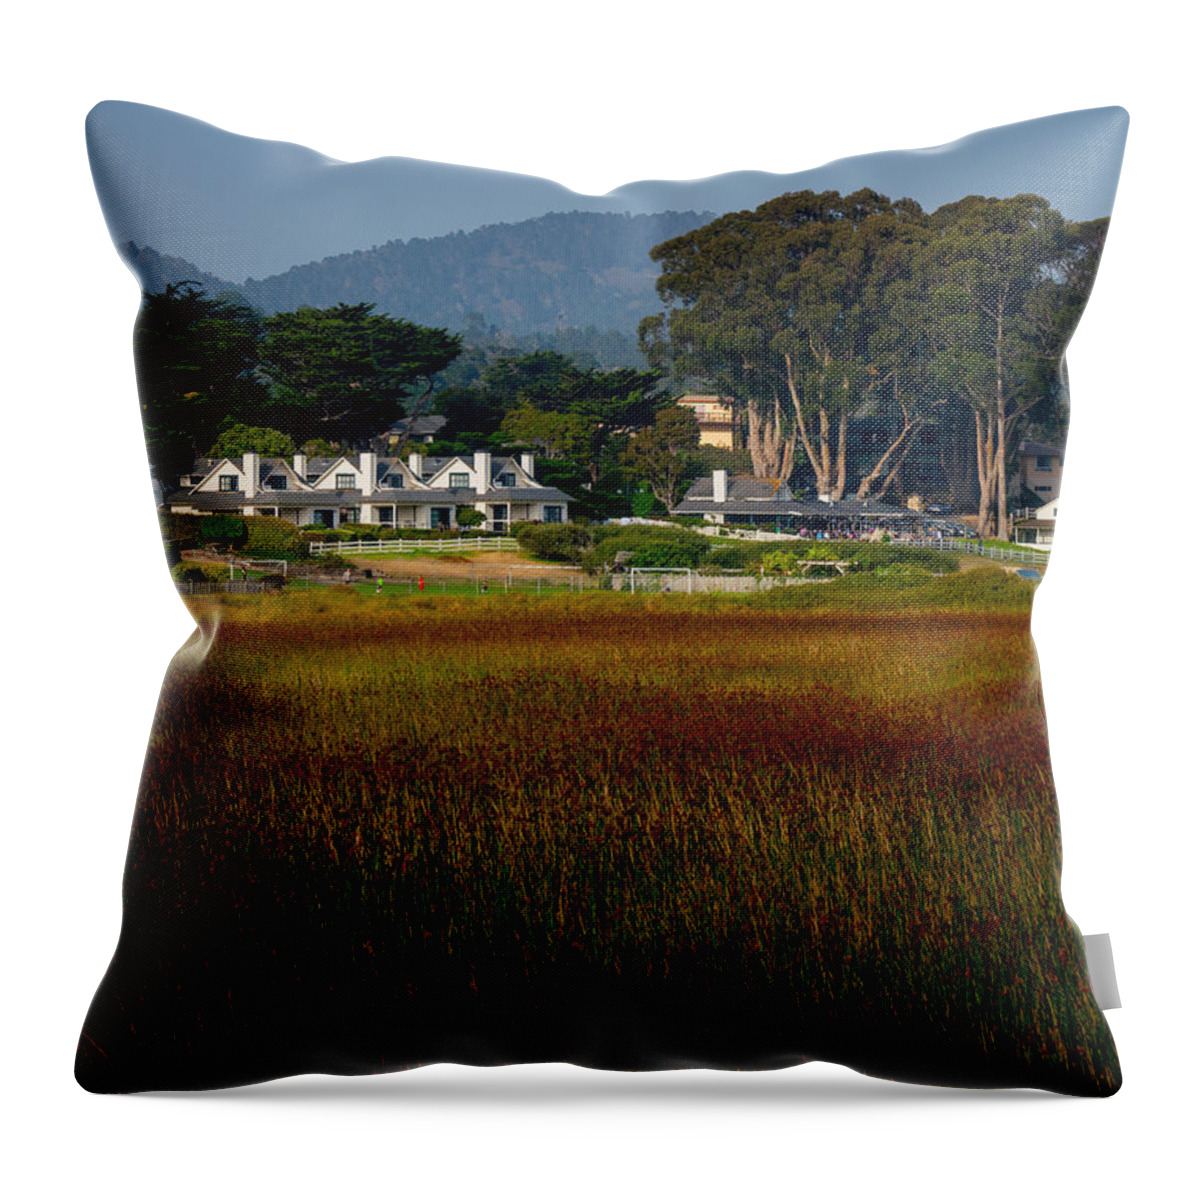 Mission Ranch Throw Pillow featuring the photograph Mission Ranch by Derek Dean